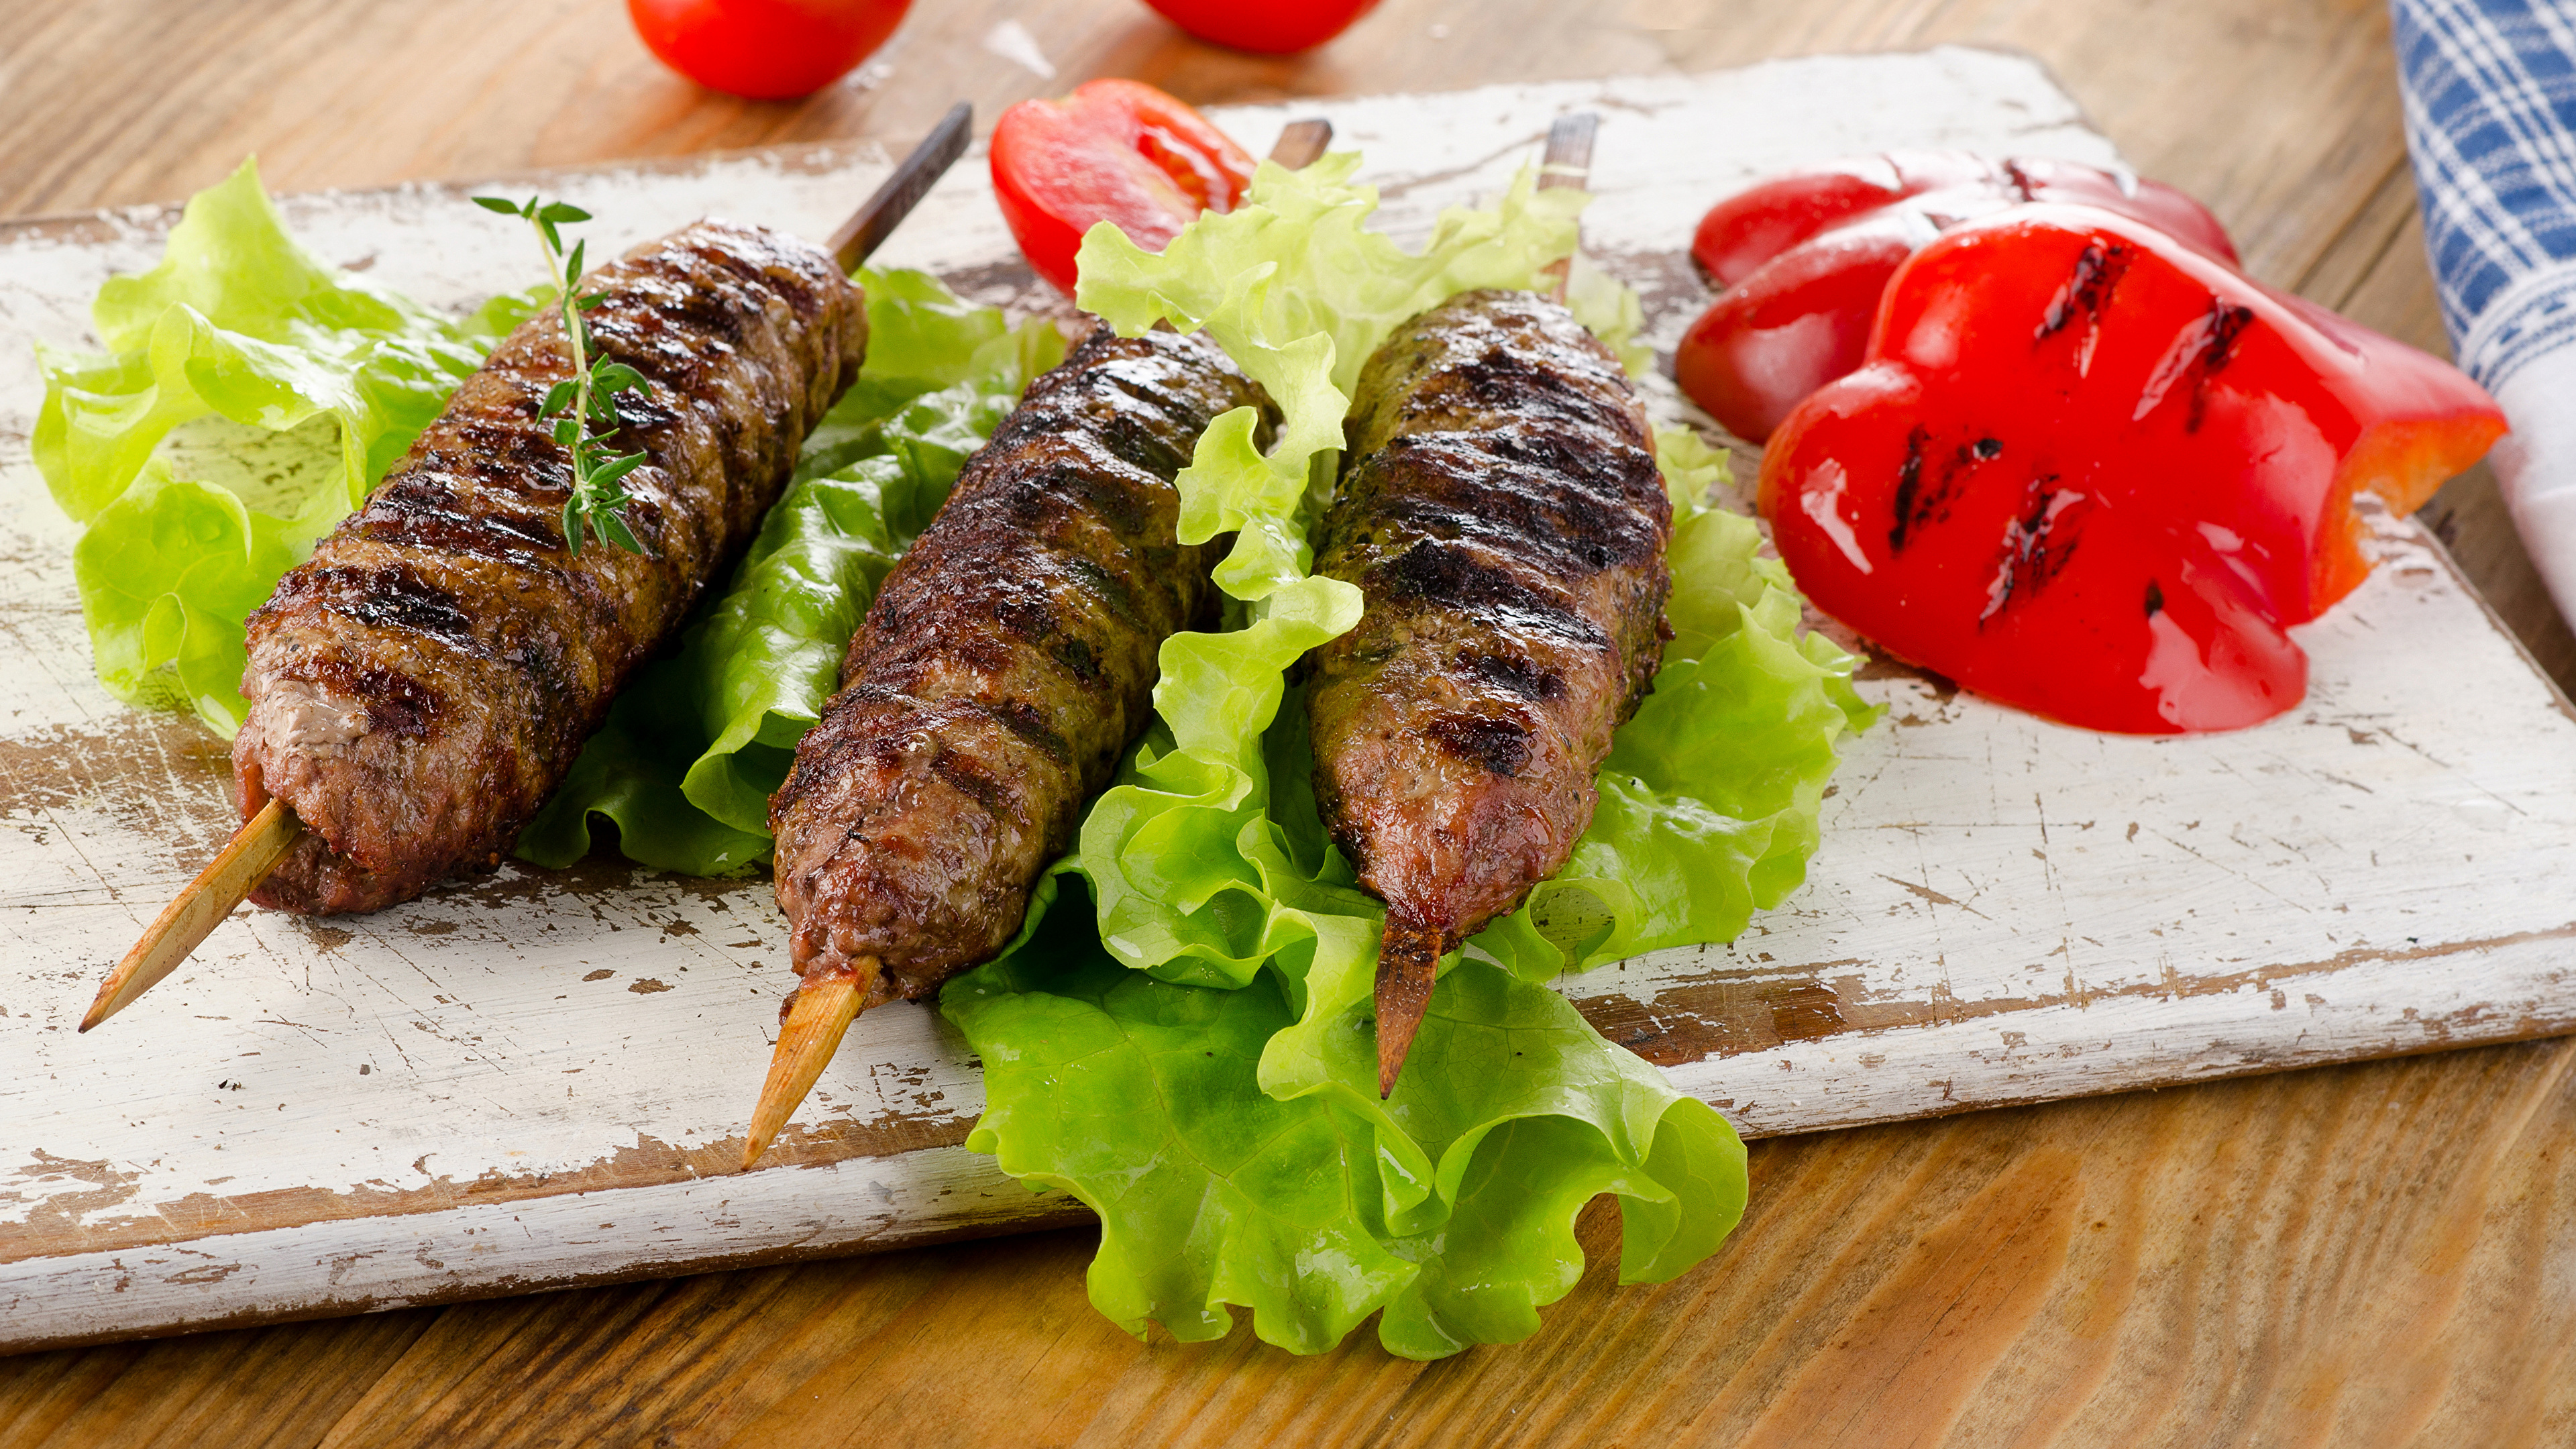 Wallpaper Kebab Tomatoes Food Meat Products 3840x2160 Images, Photos, Reviews